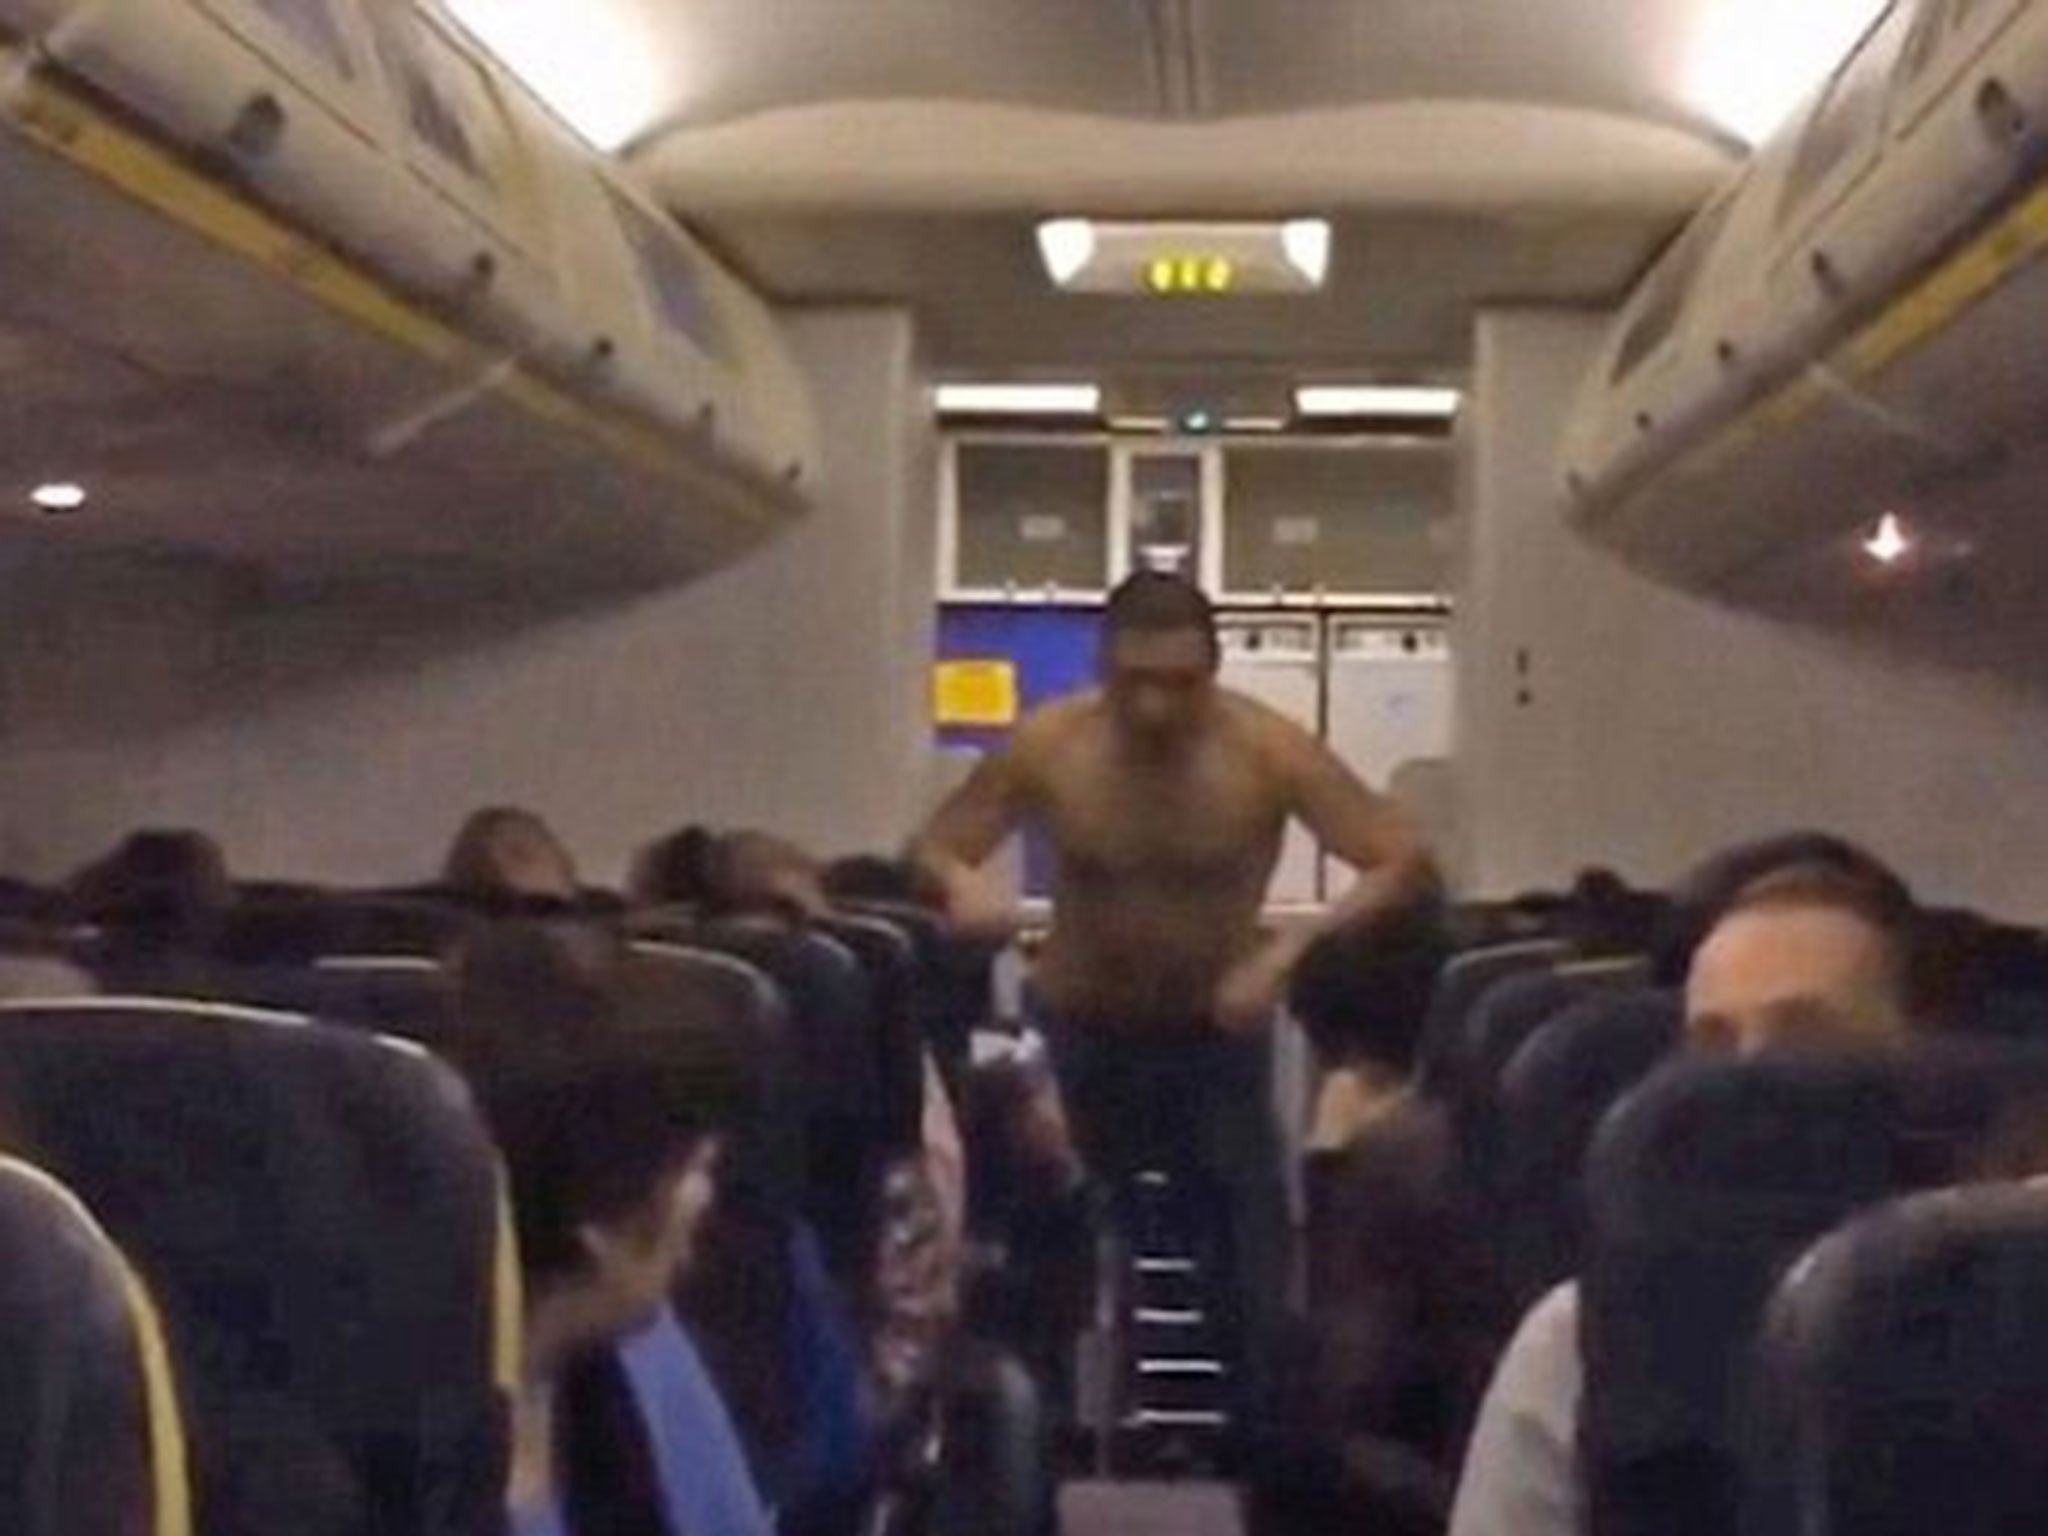 A group of passengers helped to restrain the man after he began leaning on the seats of passengers